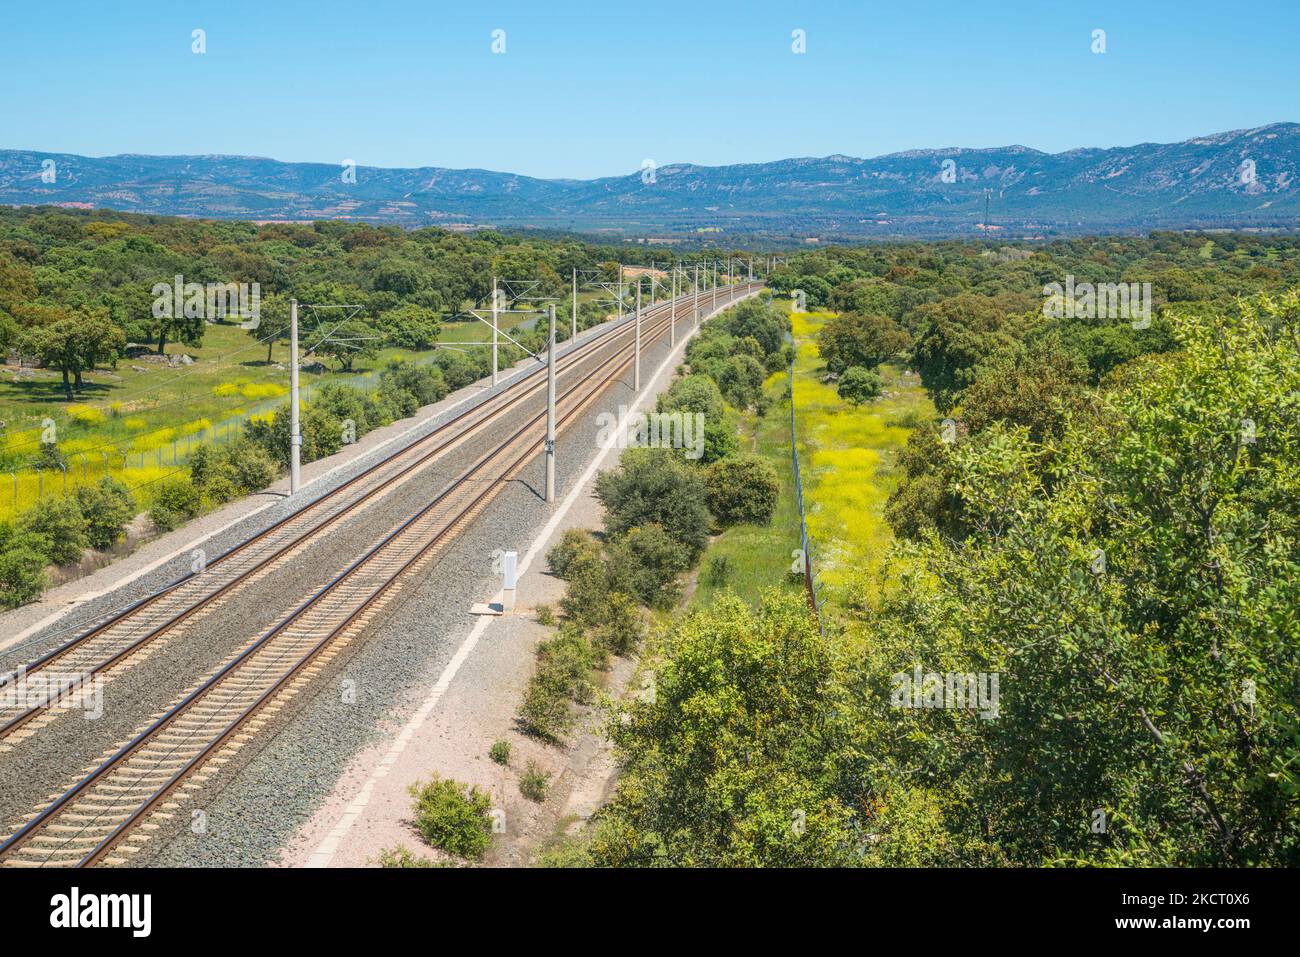 AVE tracks. Los Pedroches valley, Cordoba province, Andalucia, Spain. Stock Photo